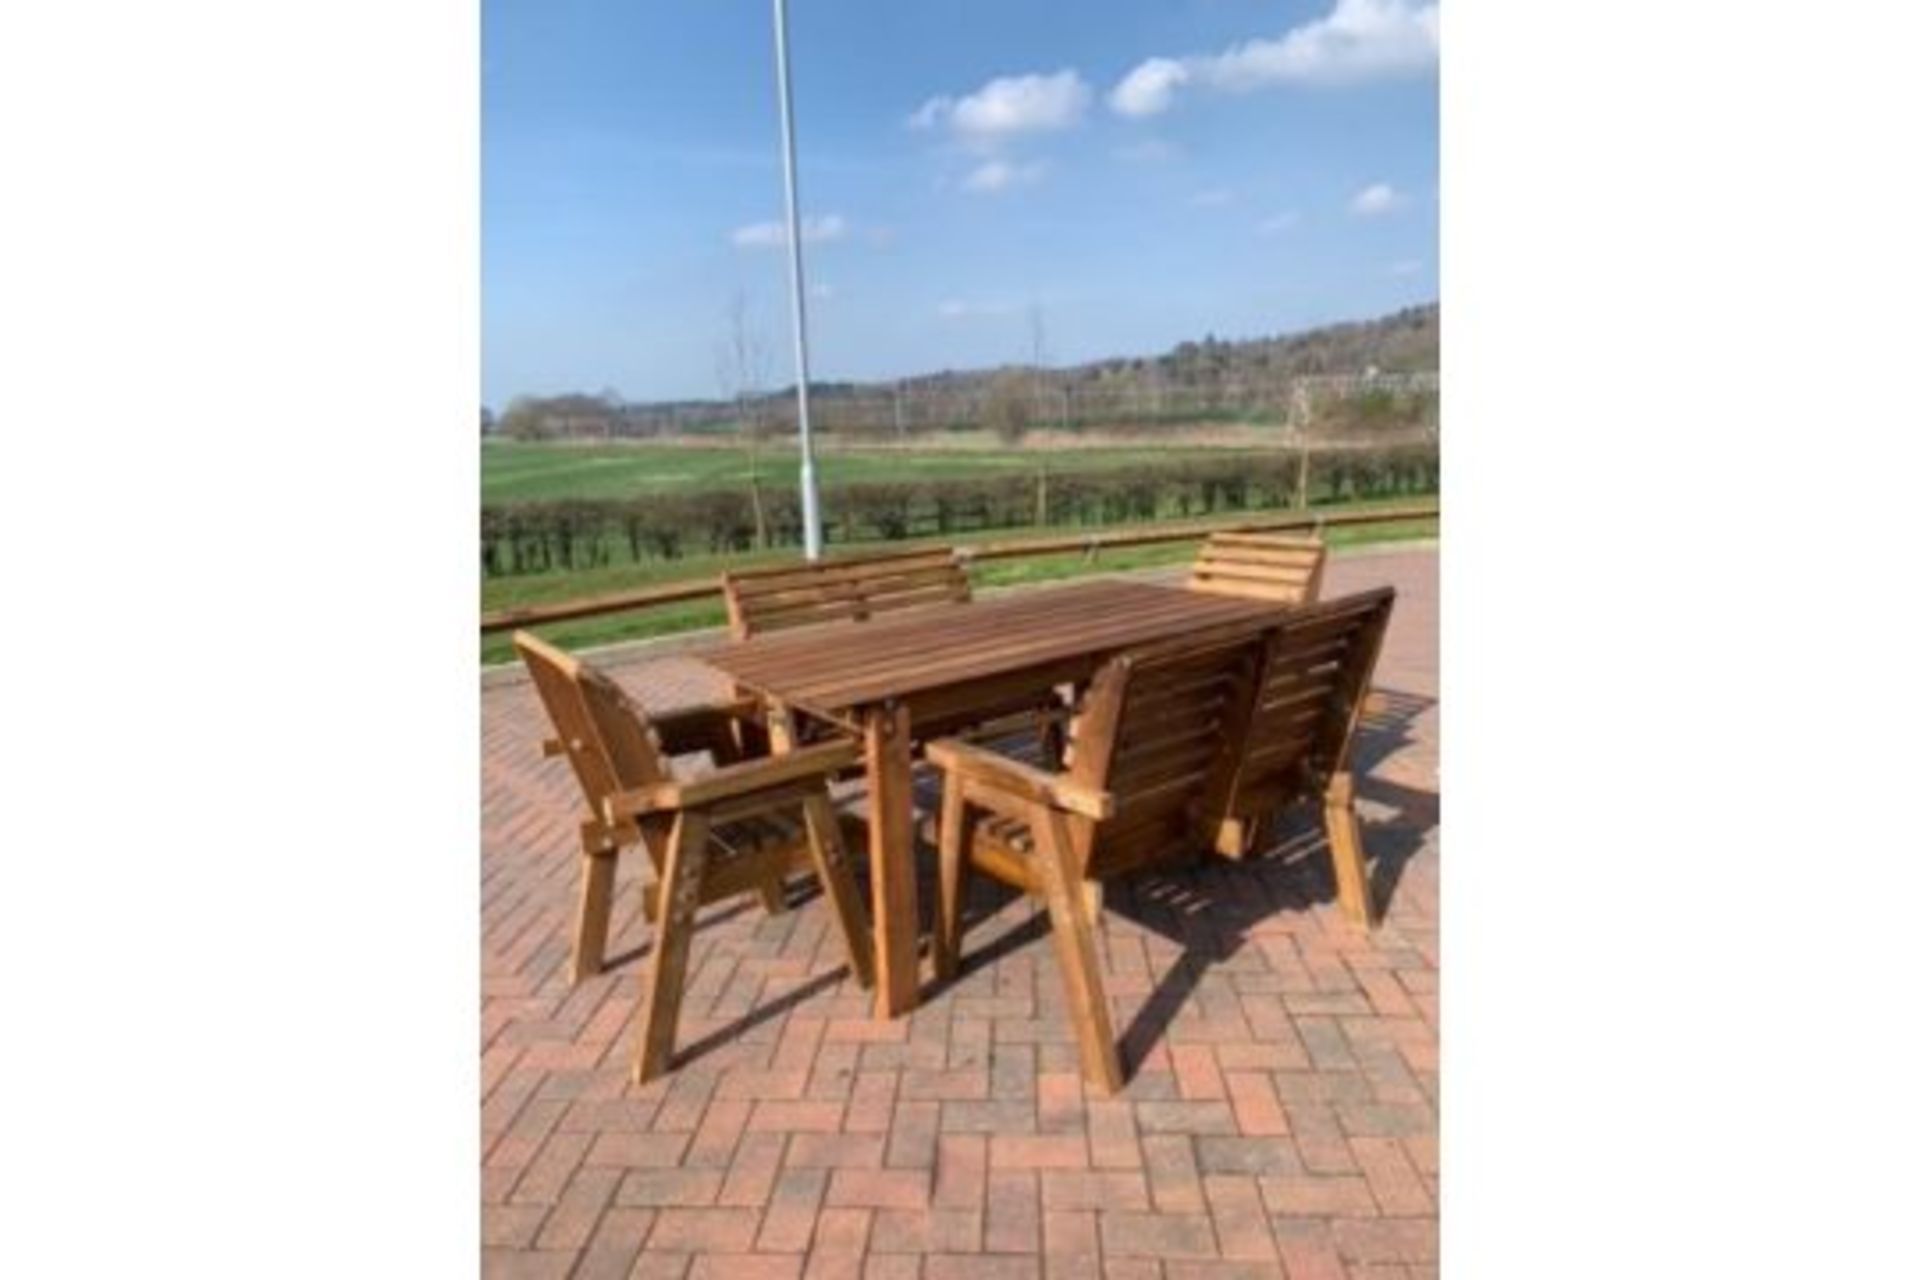 BRAND NEW QUALITY 6 seater handcrafted Garden Furniture set, Large table,2 benches, 2 chairs*NO VAT* - Image 6 of 8